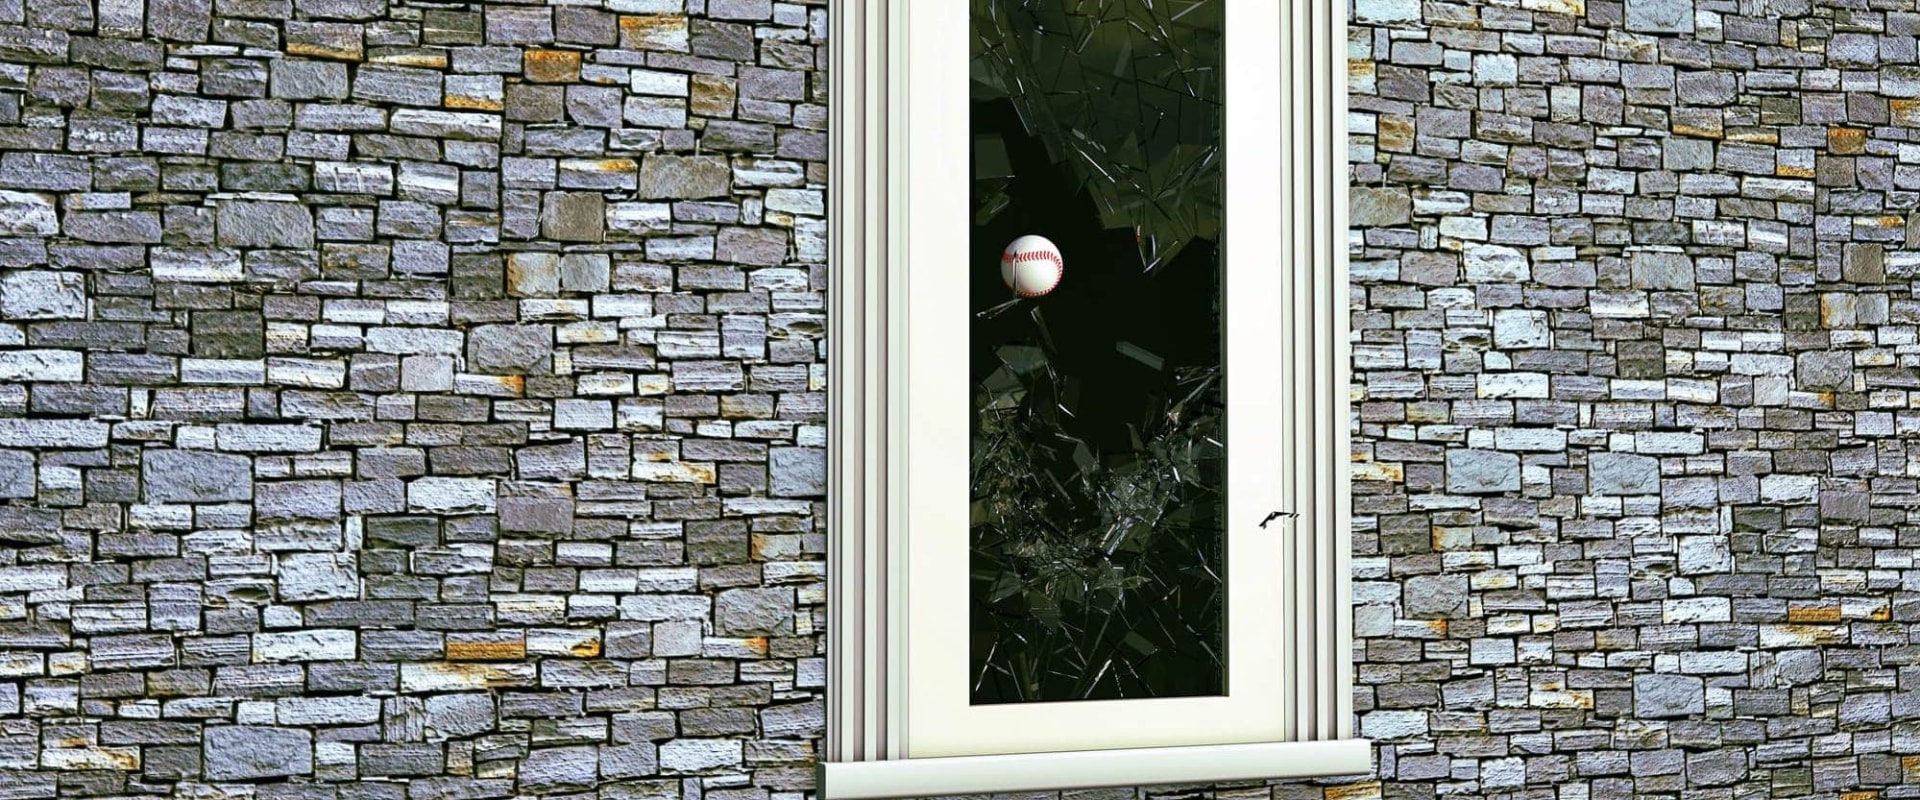 Will home insurance replace windows?